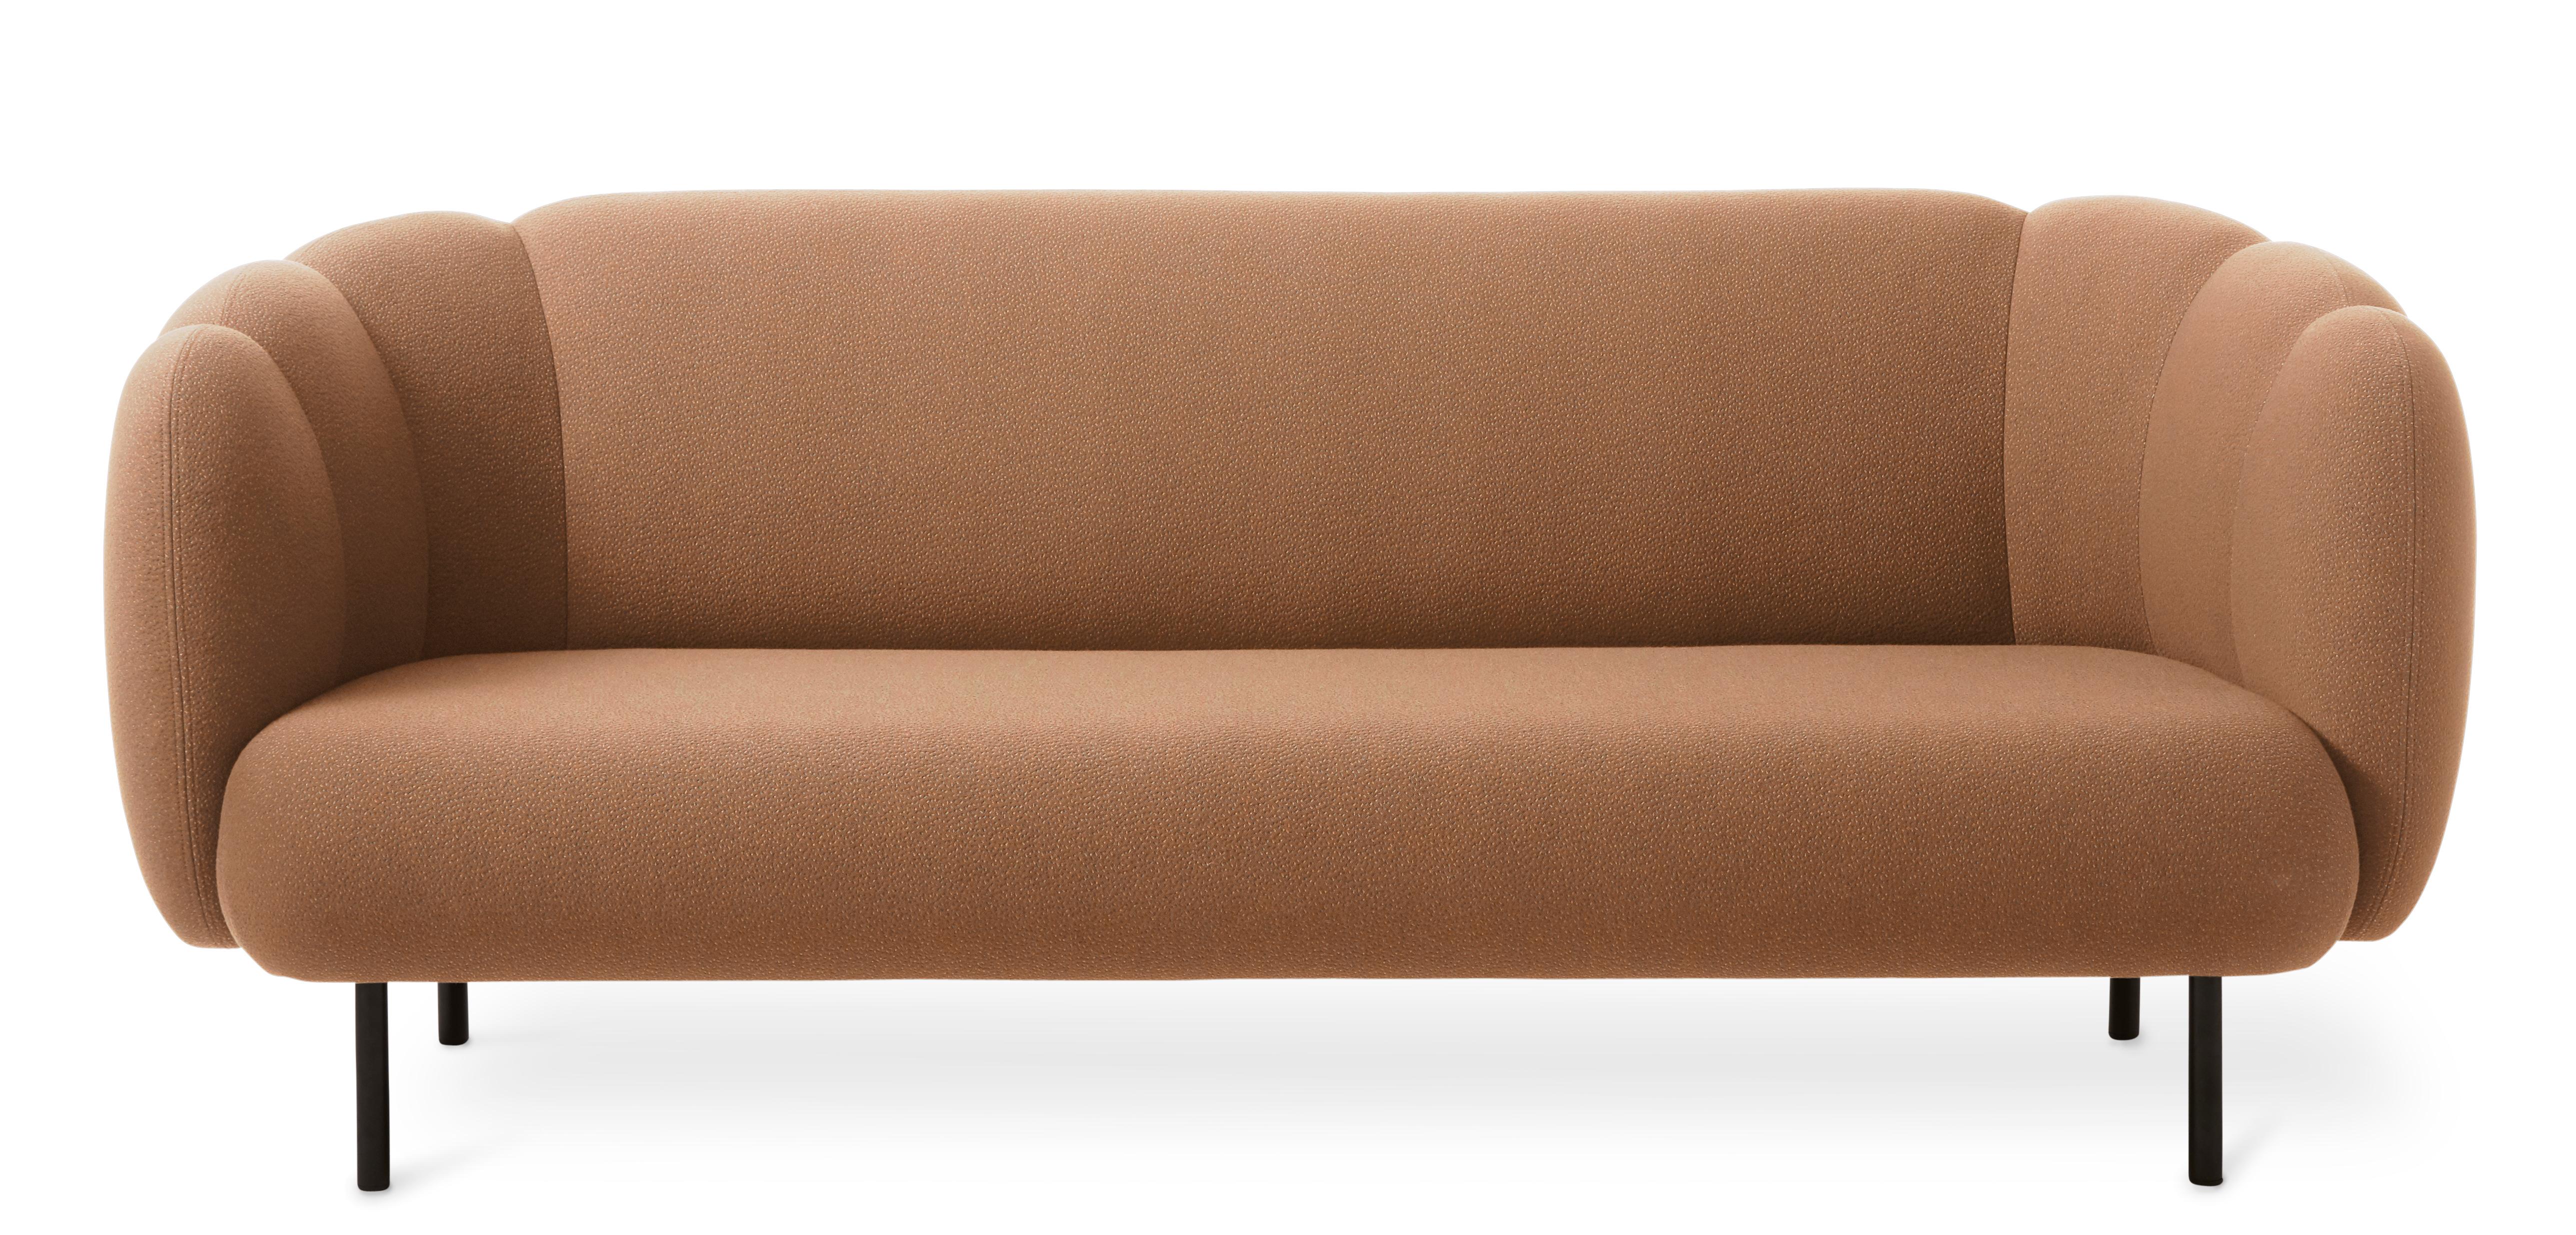 For Sale: Beige (Sprinkles 254) Cape 3-Seat Stitch Sofa, by Charlotte Høncke from Warm Nordic